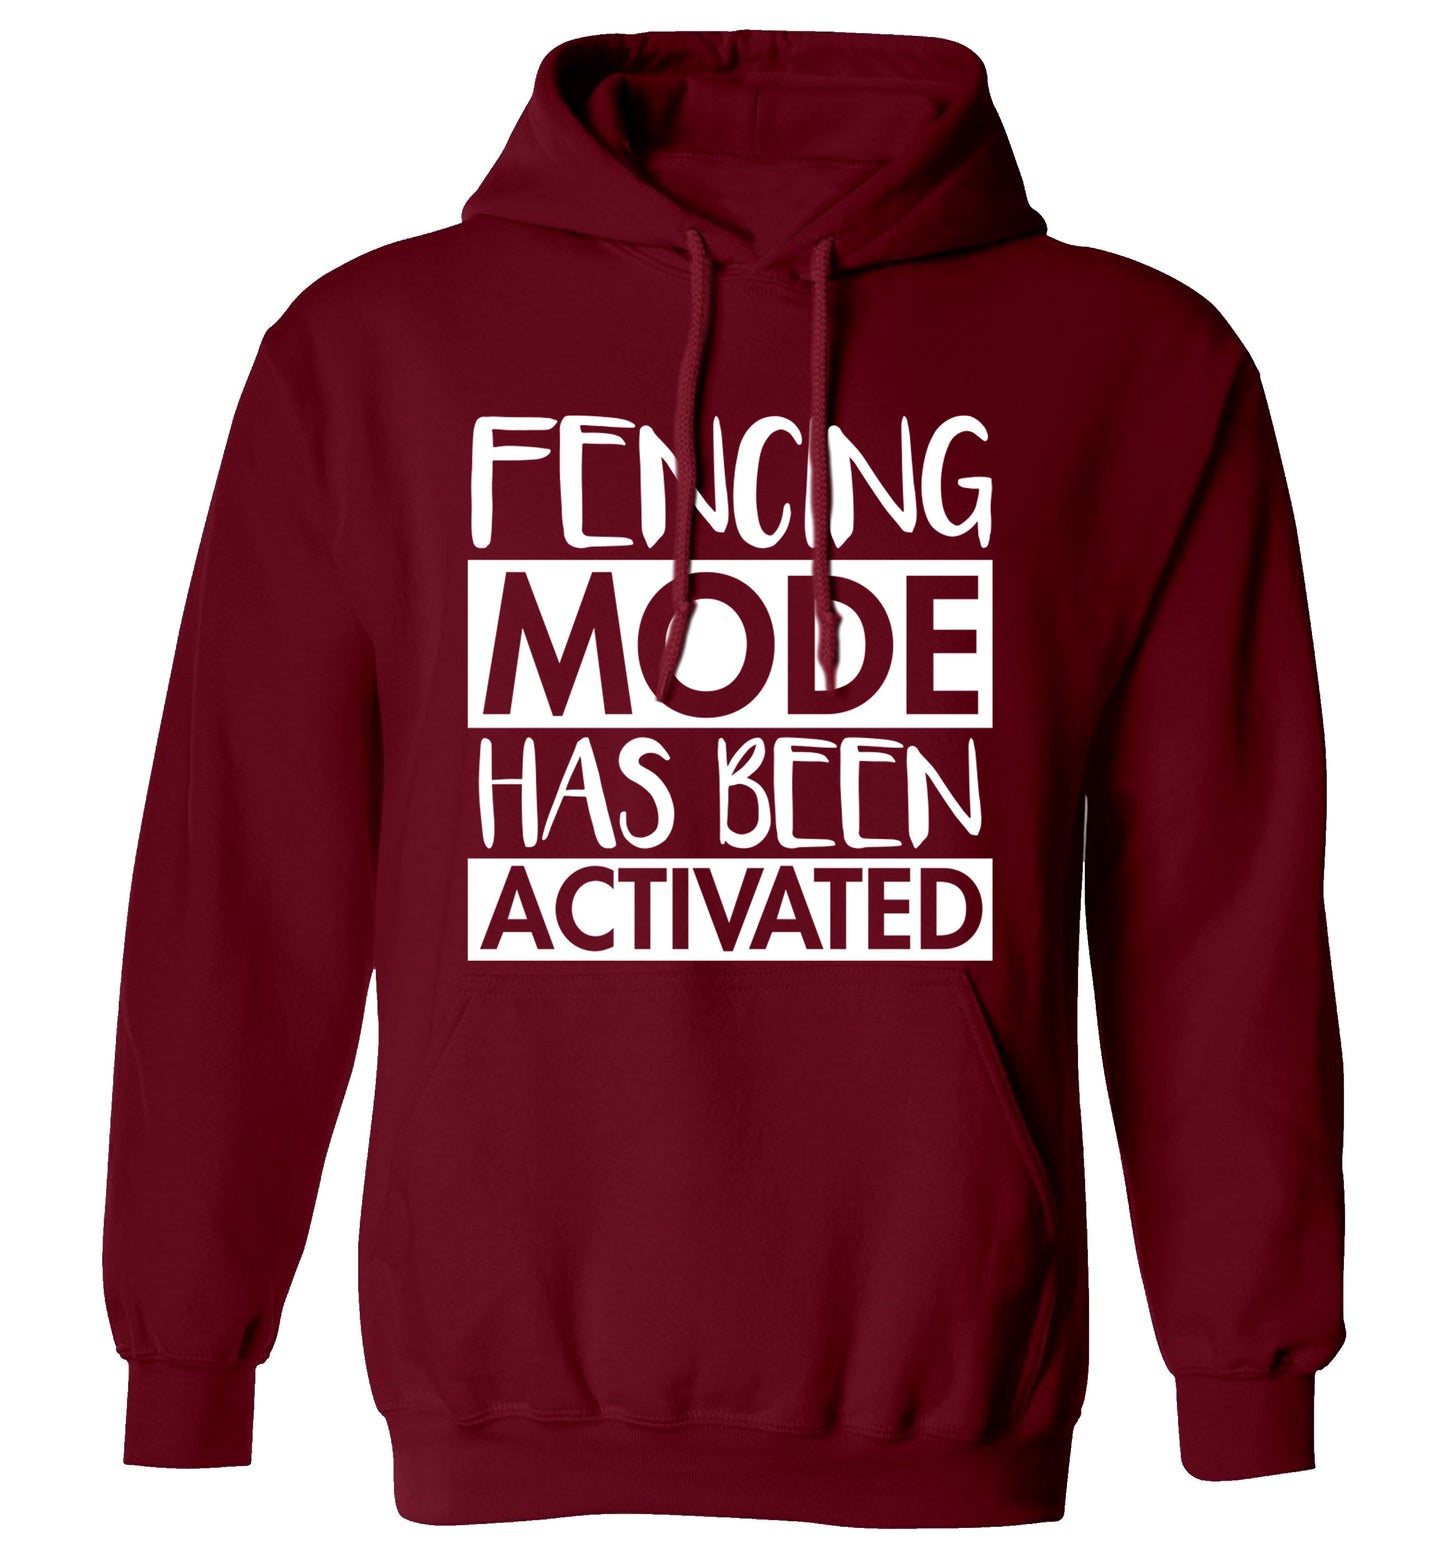 Fencing mode activated adults unisex maroon hoodie 2XL